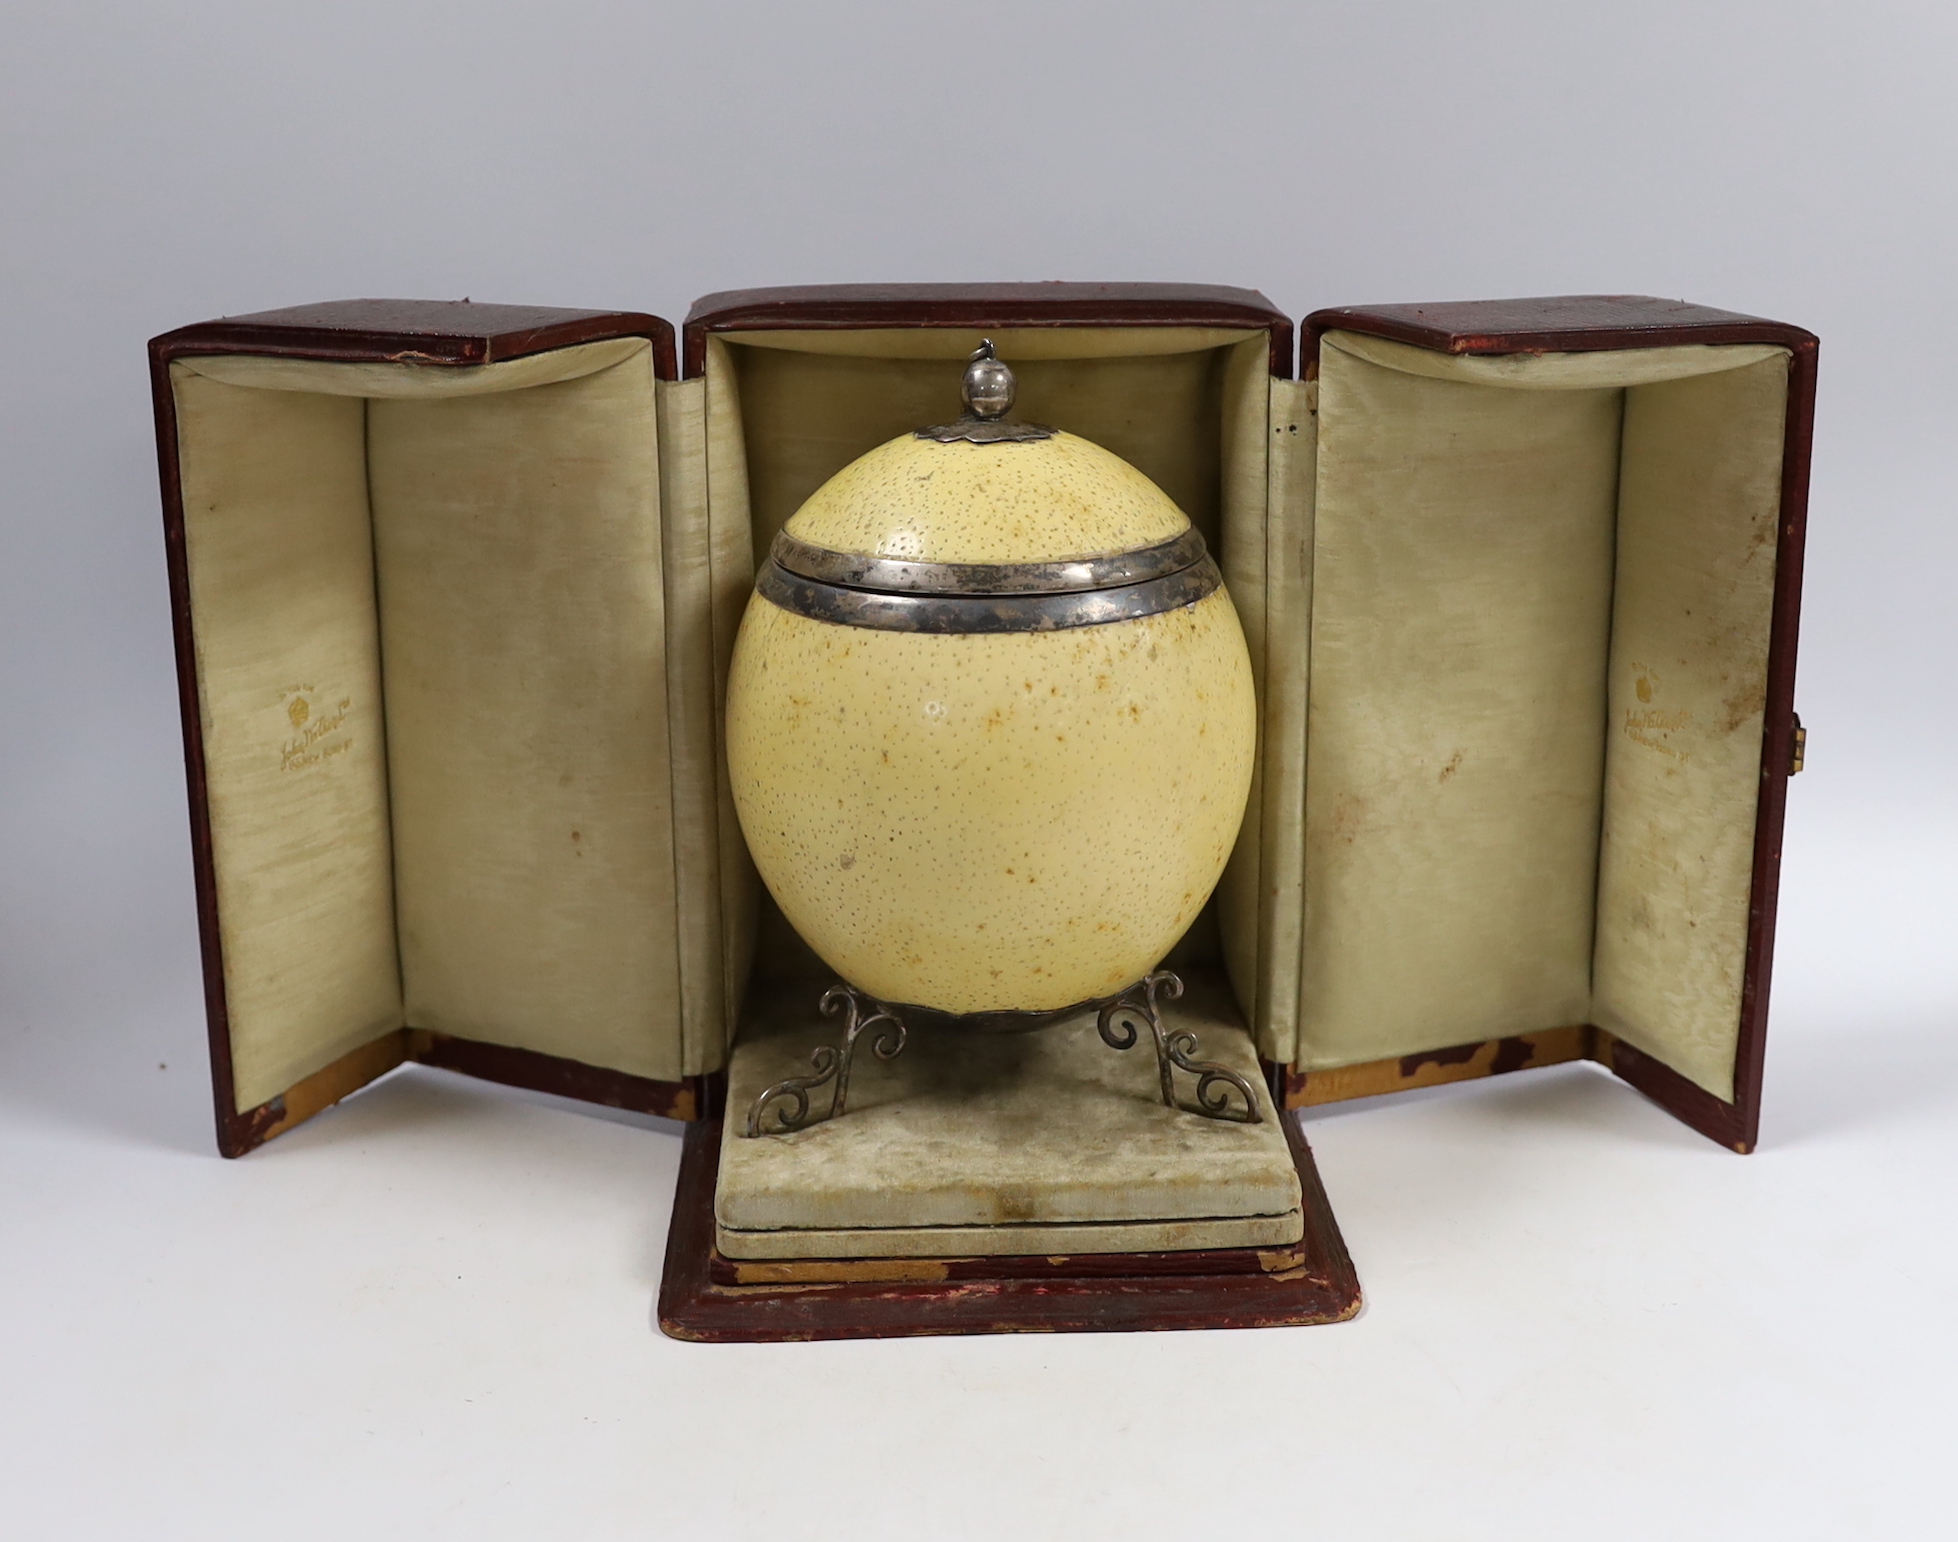 A cased Edwardian silver mounted ostrich egg, with silver mounted cover, Samuel Jacob, London, 1907, housed in a leather and watered silk case, 18.6cm.